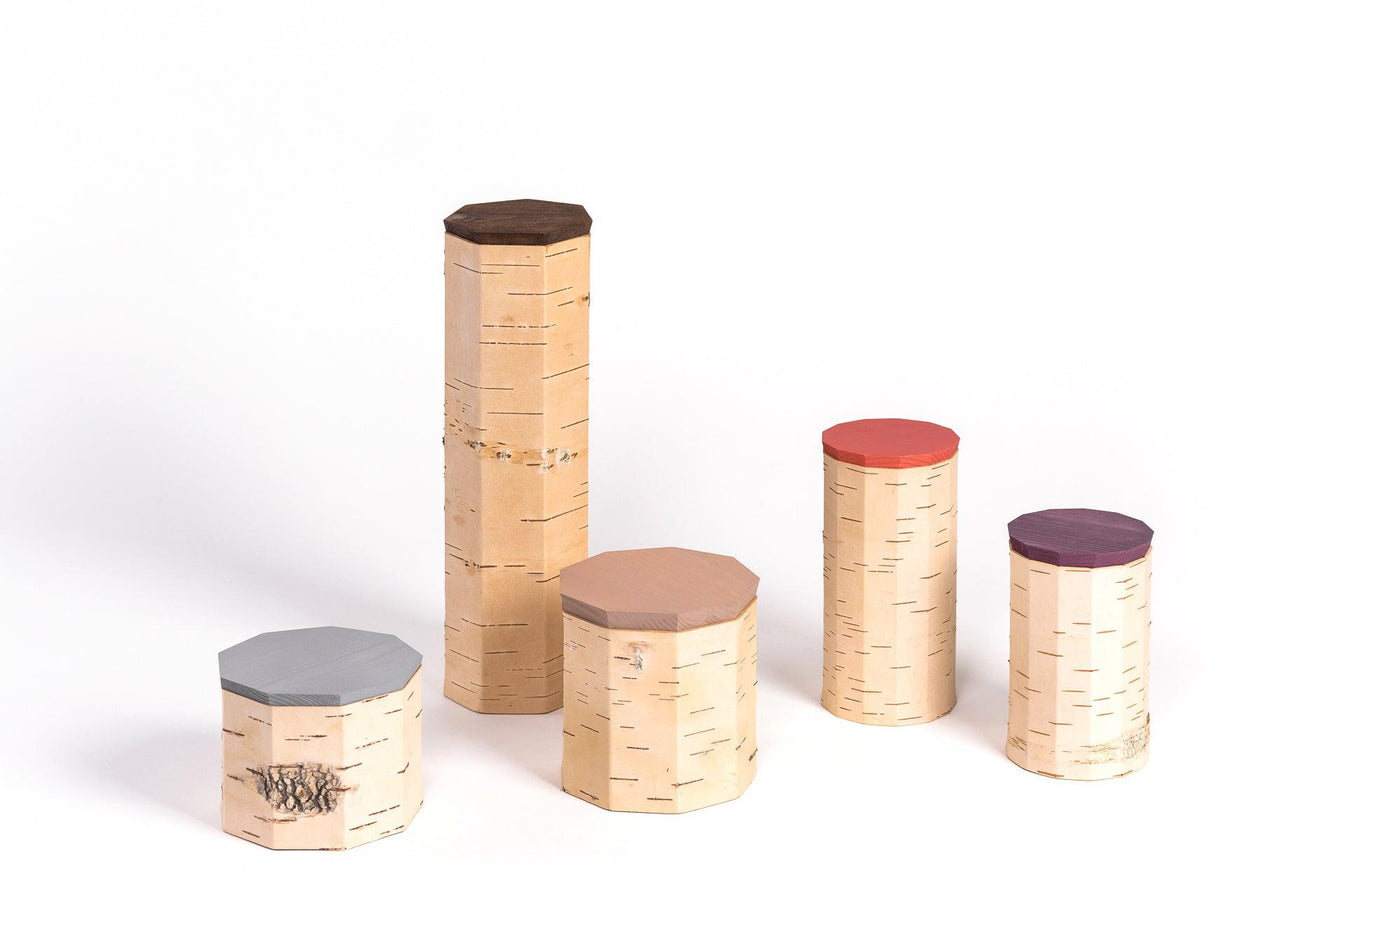 Tuesa Birch Bark Containers-Cooking and Eating-BIRCH BARK, BOXES / ORGANISERS / CONTAINERS-Forest Homes-Nature inspired decor-Nature decor